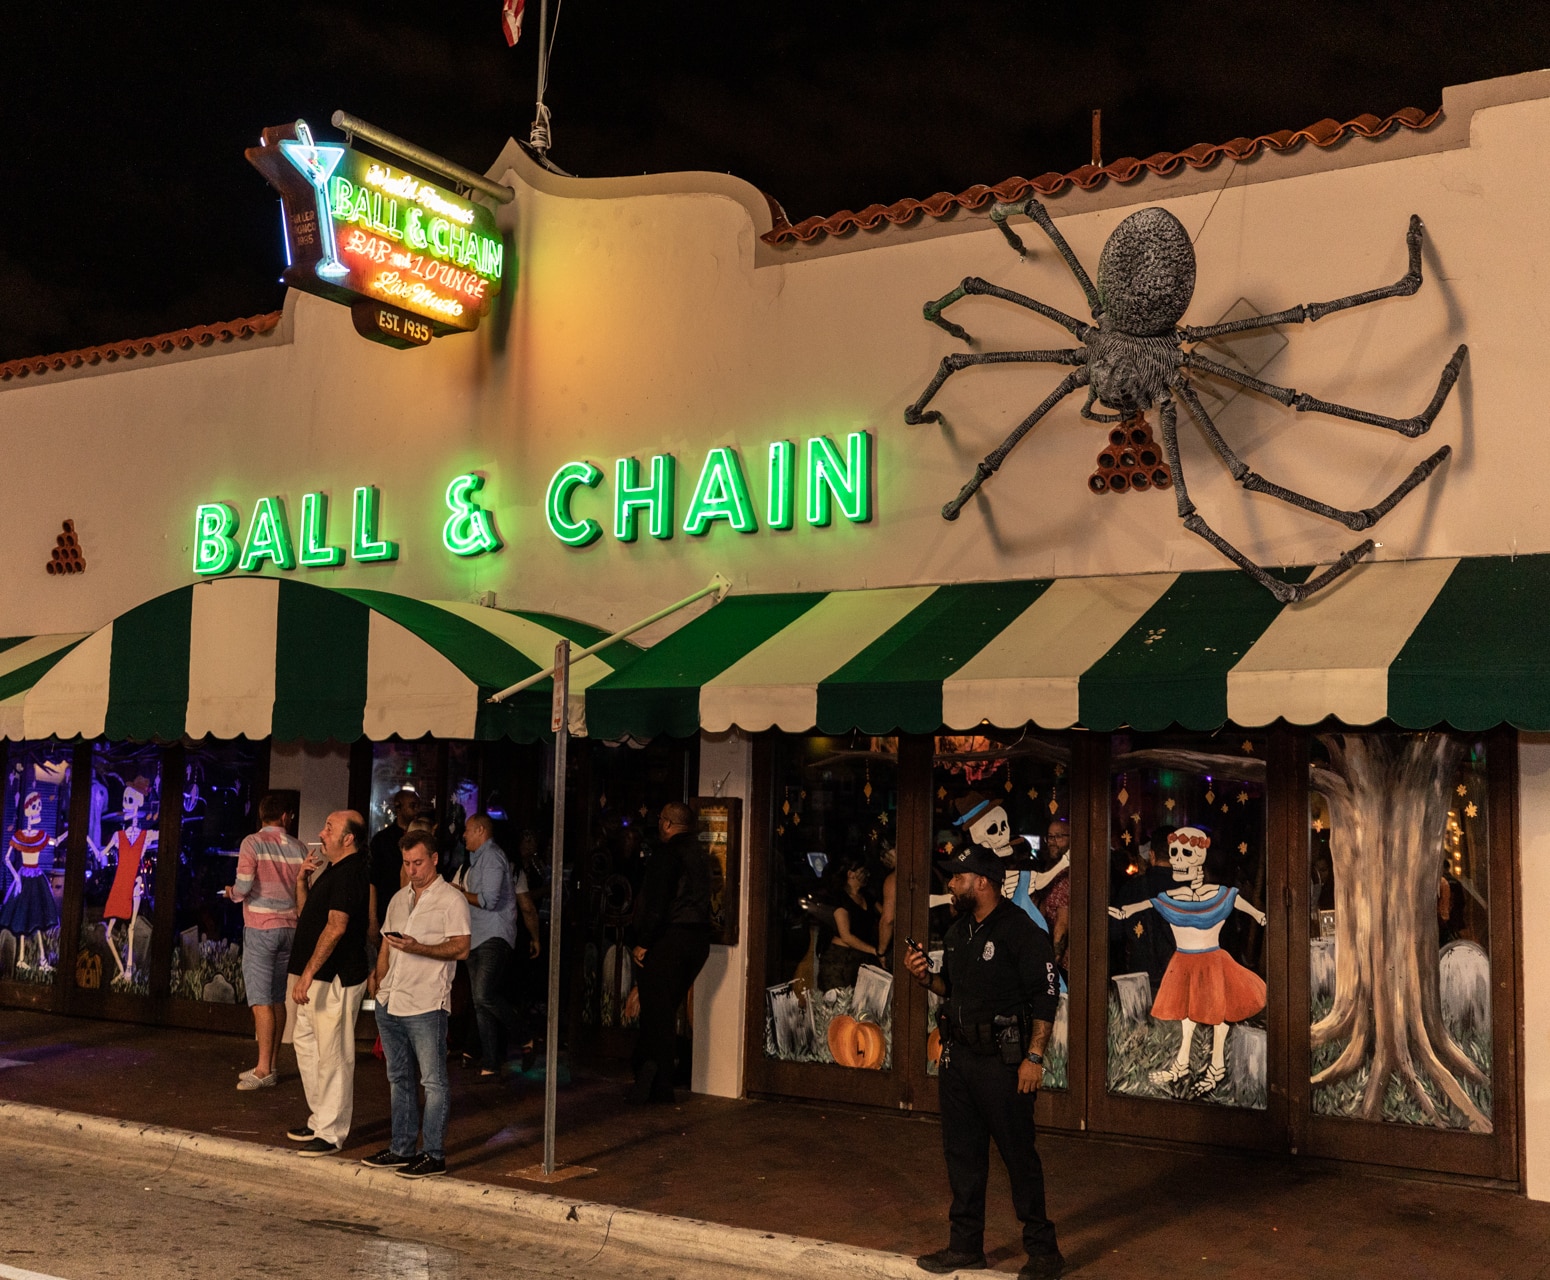 Ball & Chain Halloween decor with a giant spider at the entrance